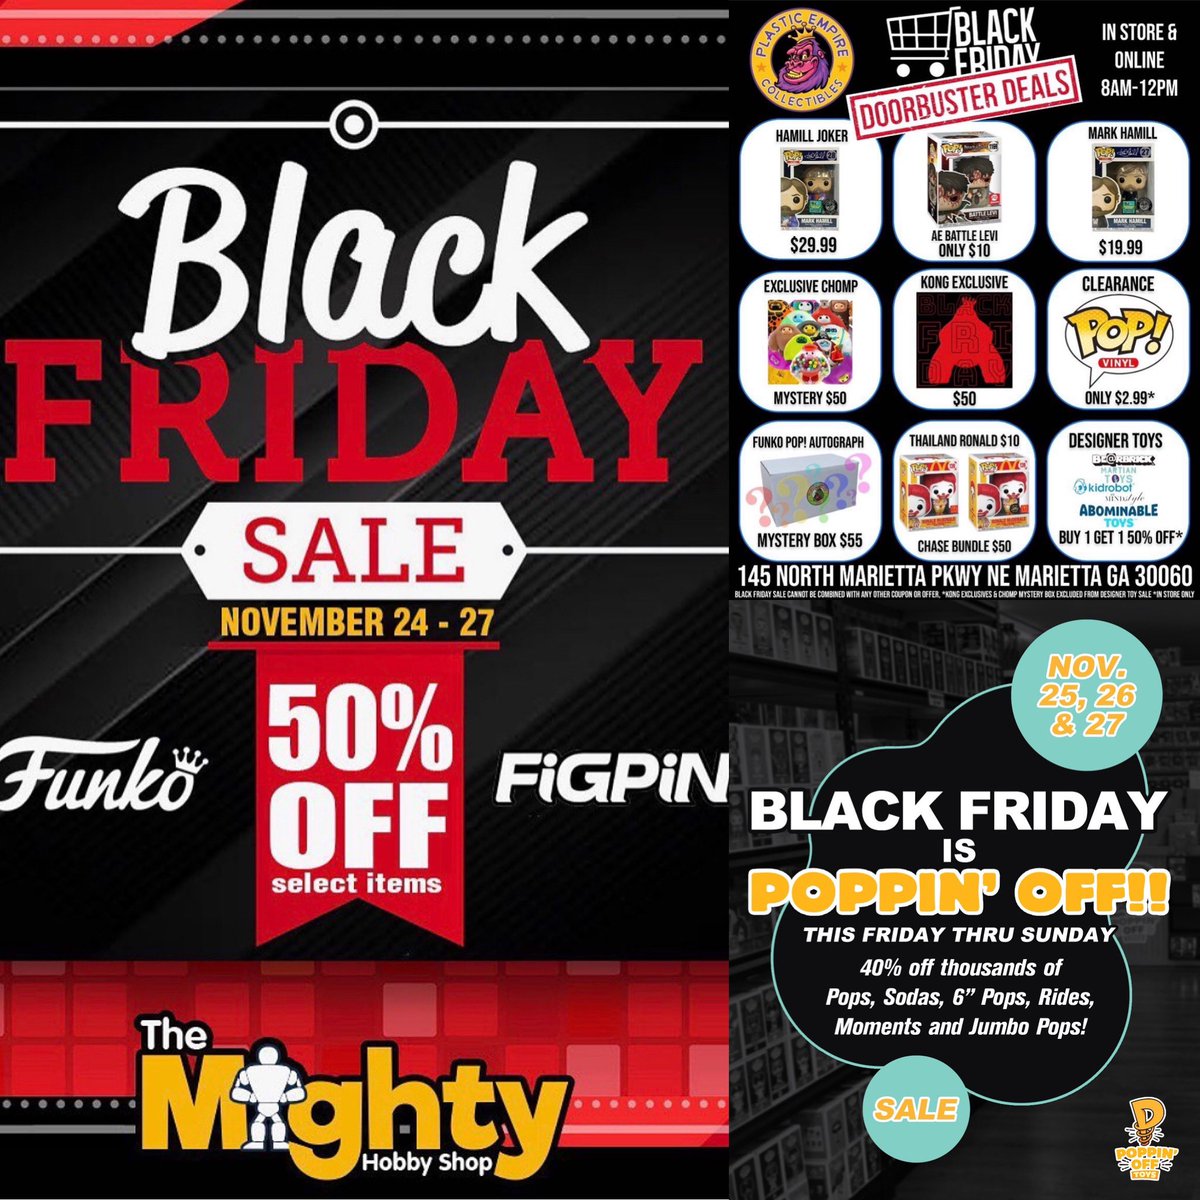 #ShopSmallSaturday Check out these small stores’ Black Friday & Funko selection! #SupportSmallBusiness #Ad #Collectibles . @PoppinOffToys - bit.ly/Poppinofftoyss @plasticempire - lddy.no/9t58 @themightyhobby - mhstoys.com/?ref=olqy0fgug…